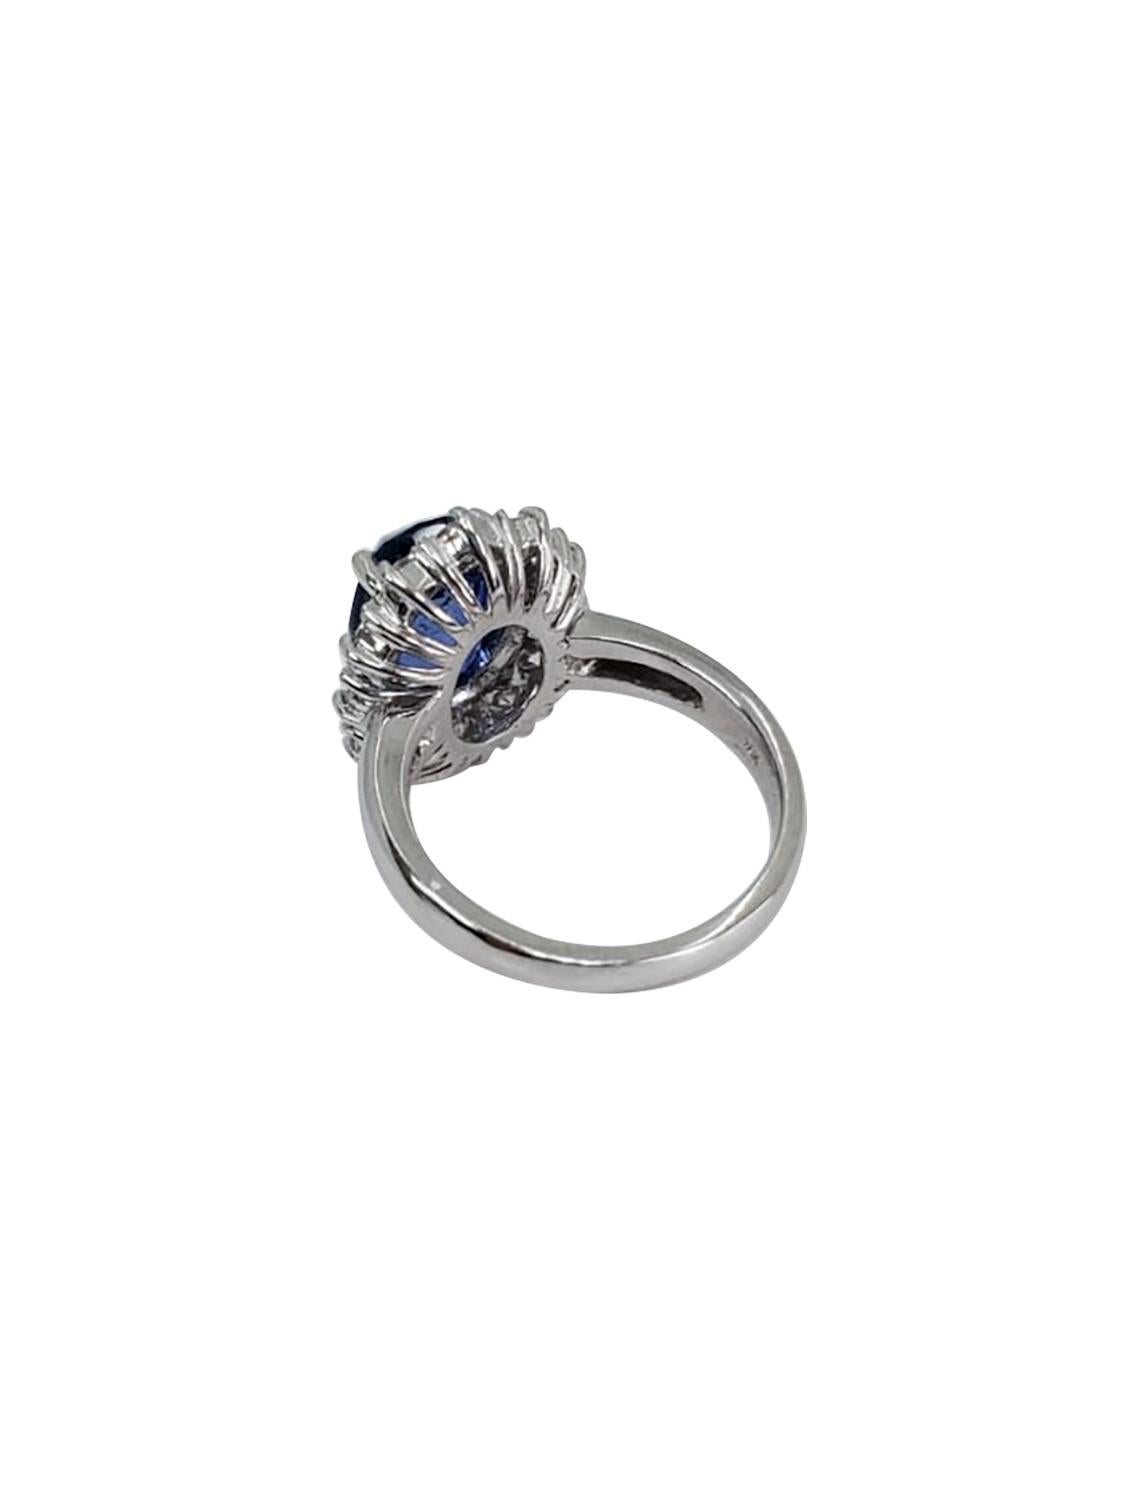 white gold diamond and sapphire ring